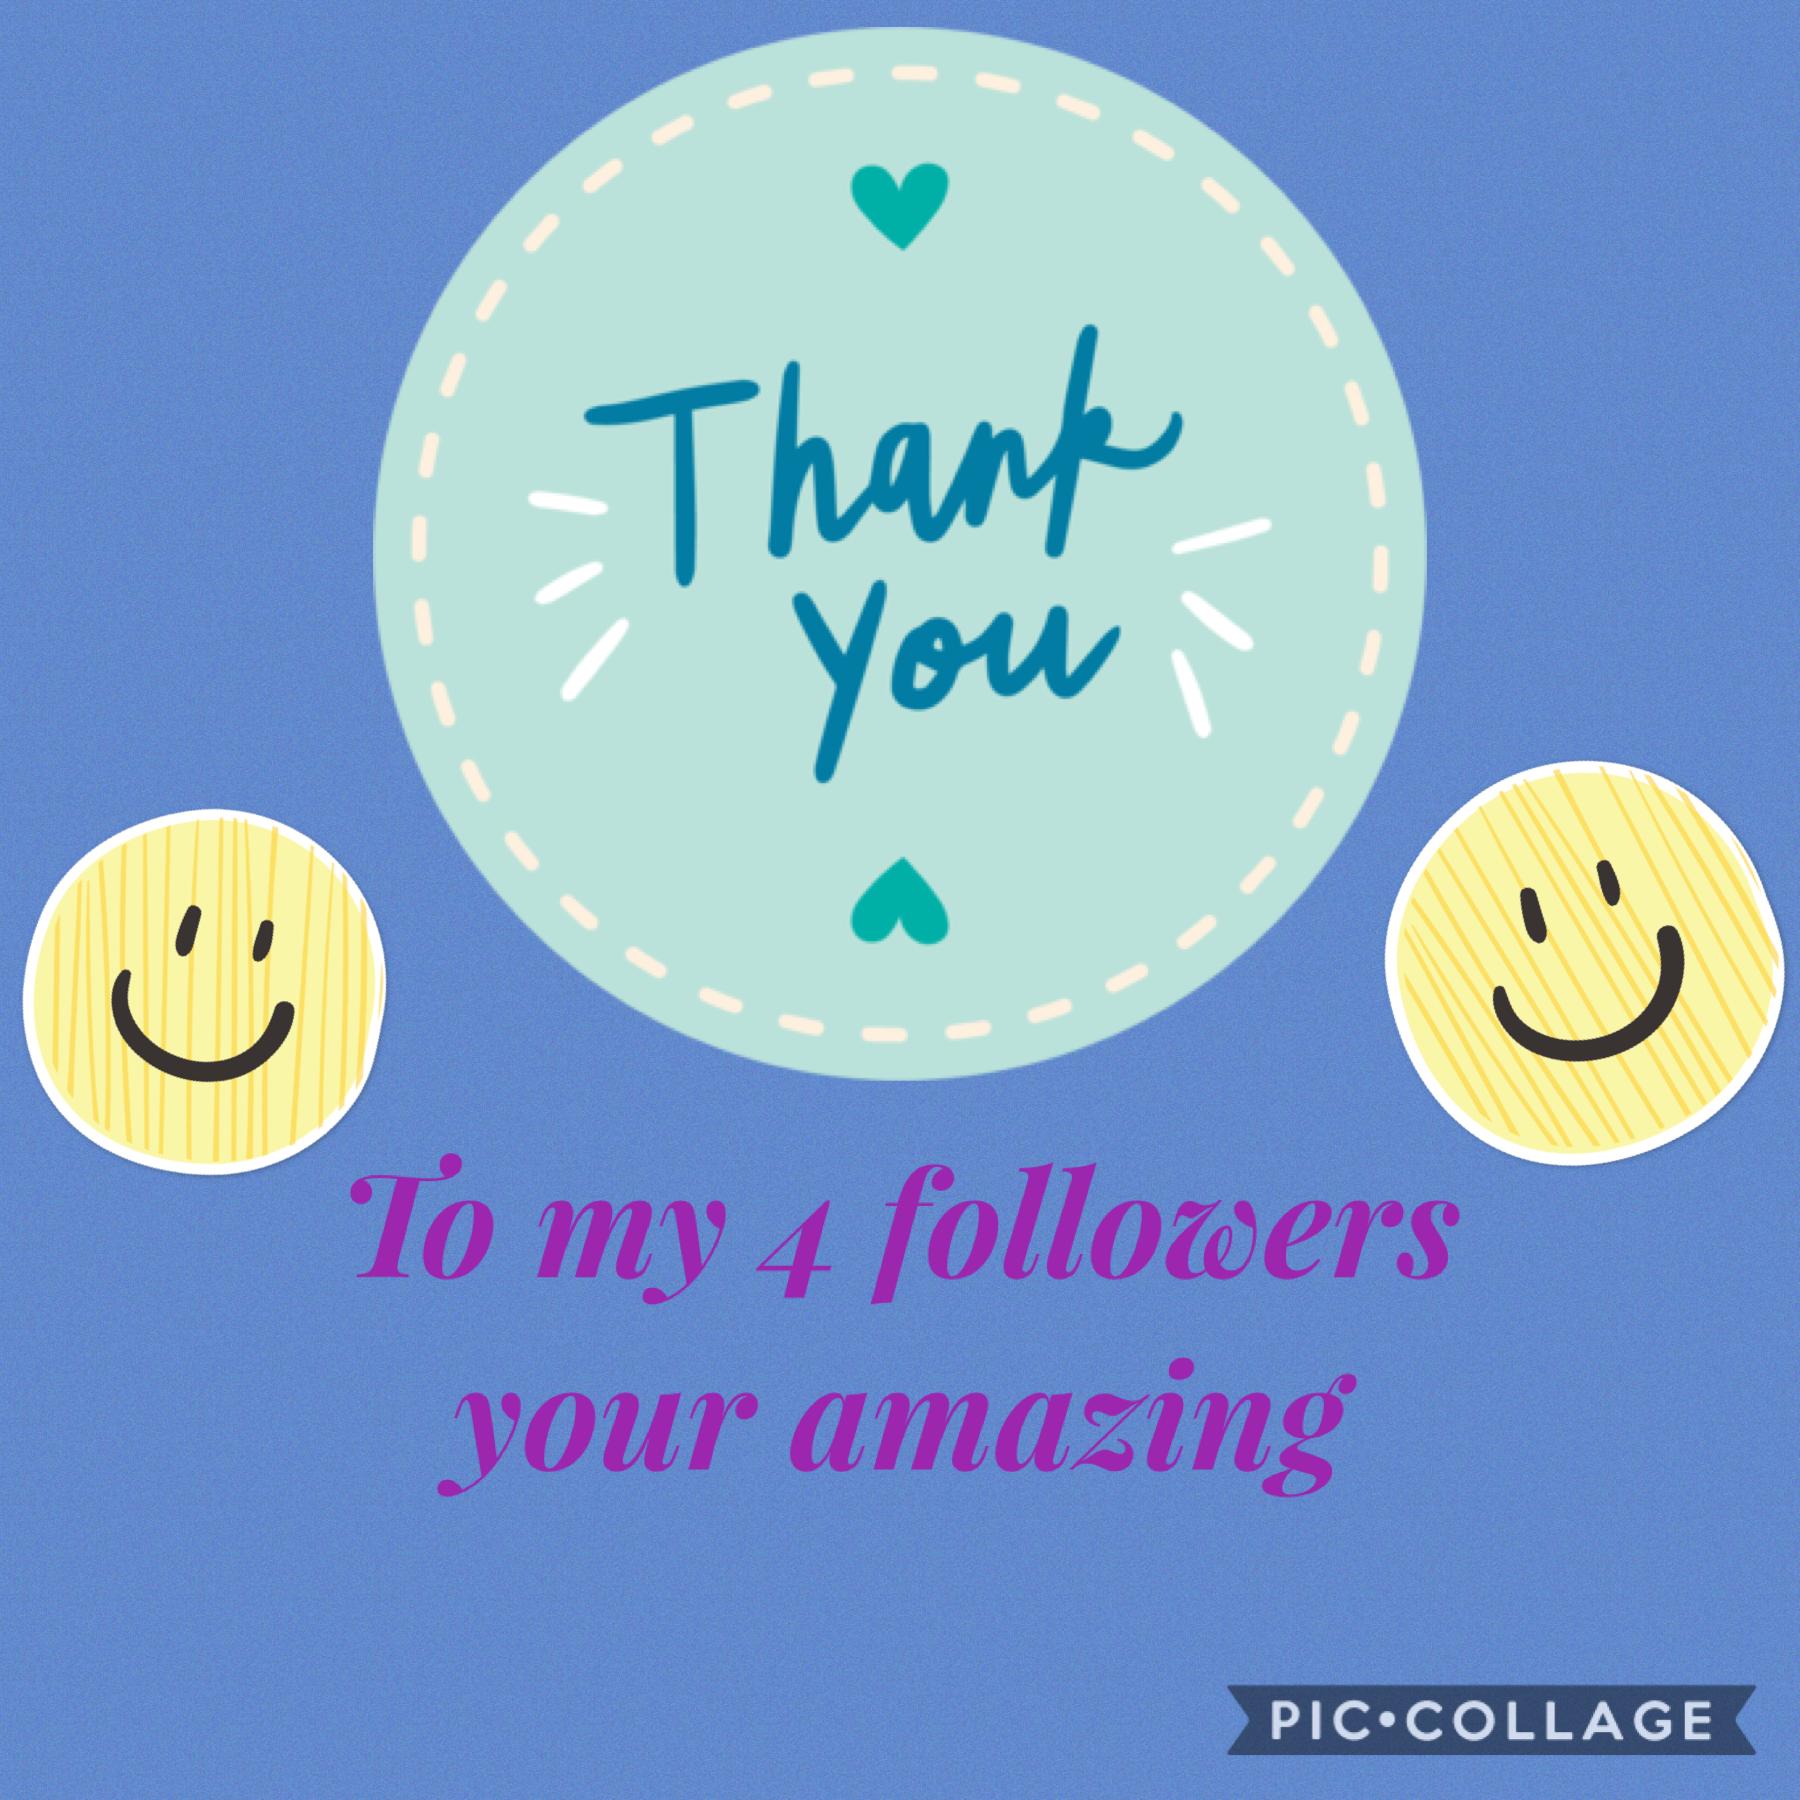 Thanks guys for following me